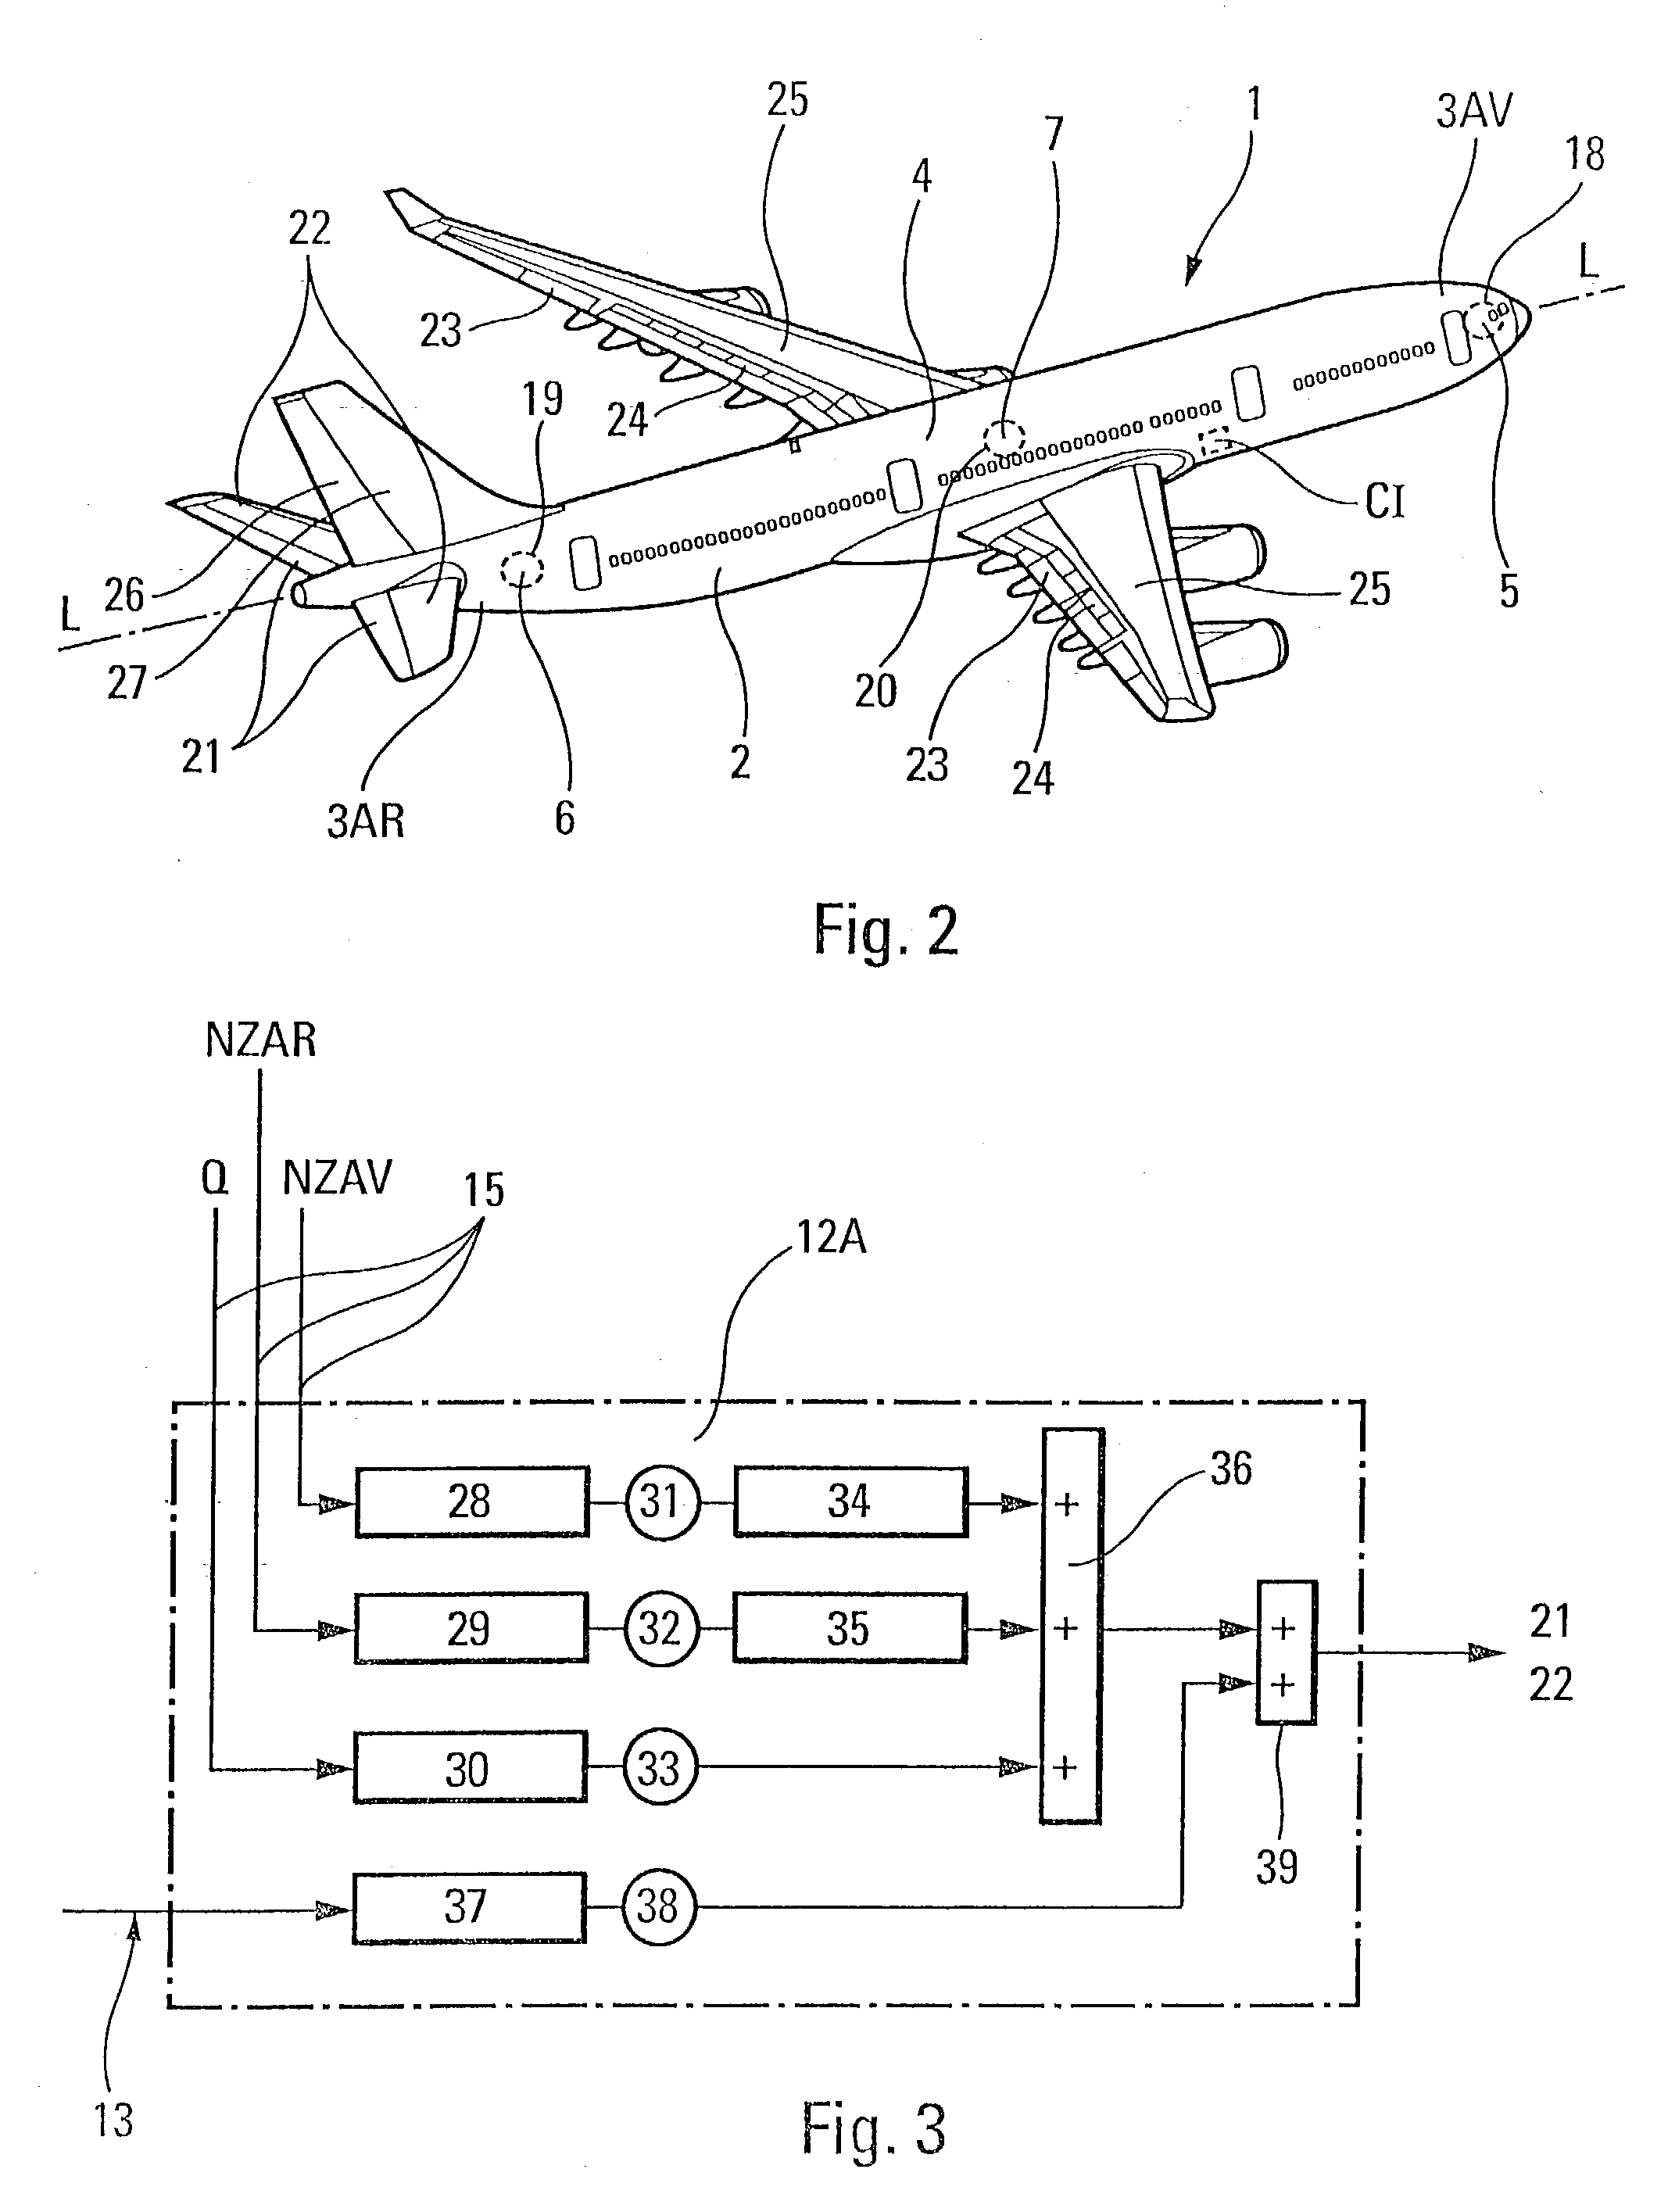 Aircraft with electric flight controls provided with a fuselage able to deform and vibrate